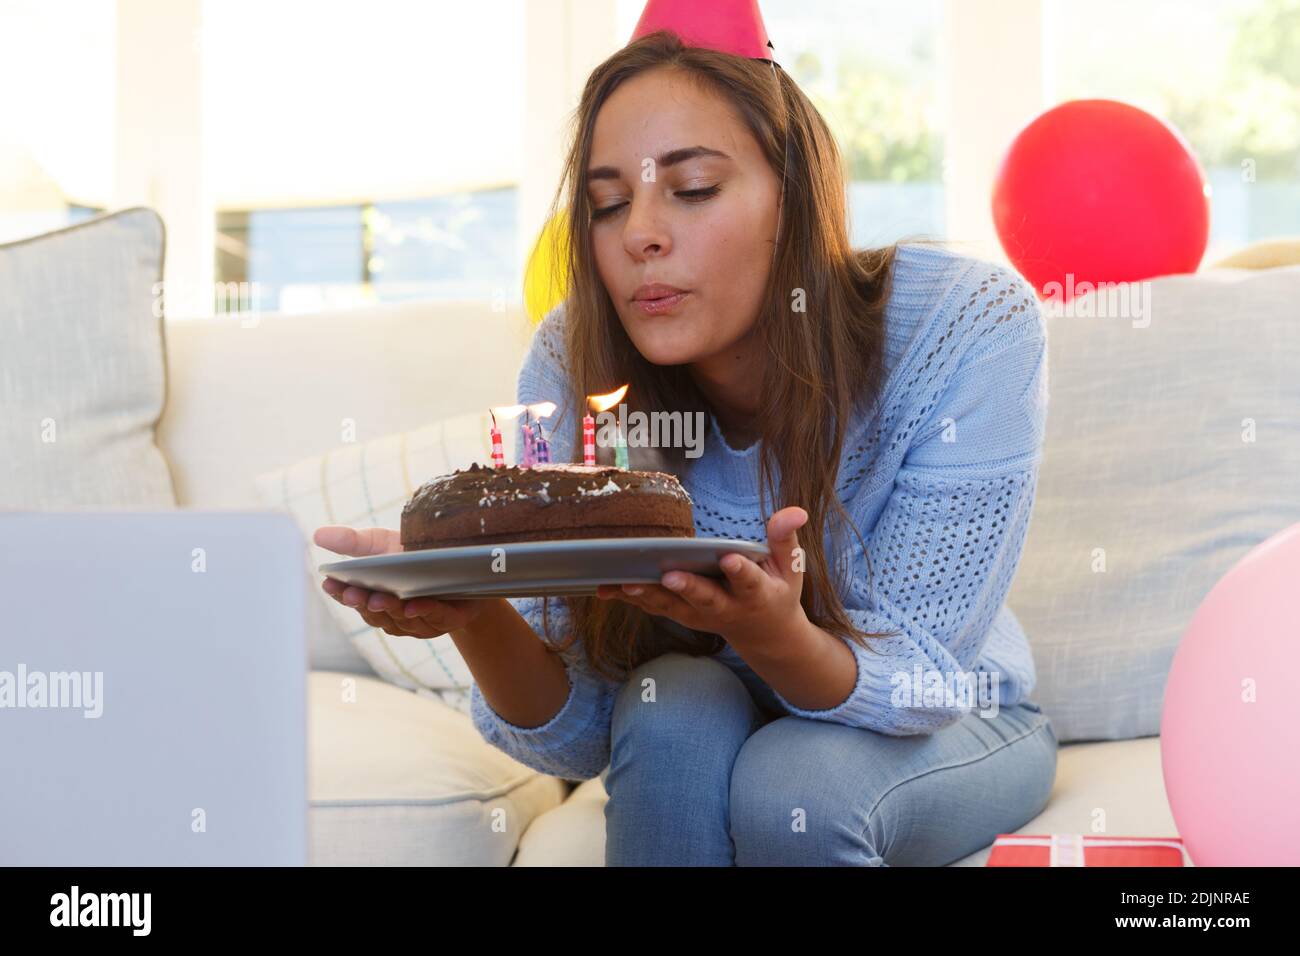 Caucasian woman having birthday video call blowing out candles on cake wearing party hat Stock Photo